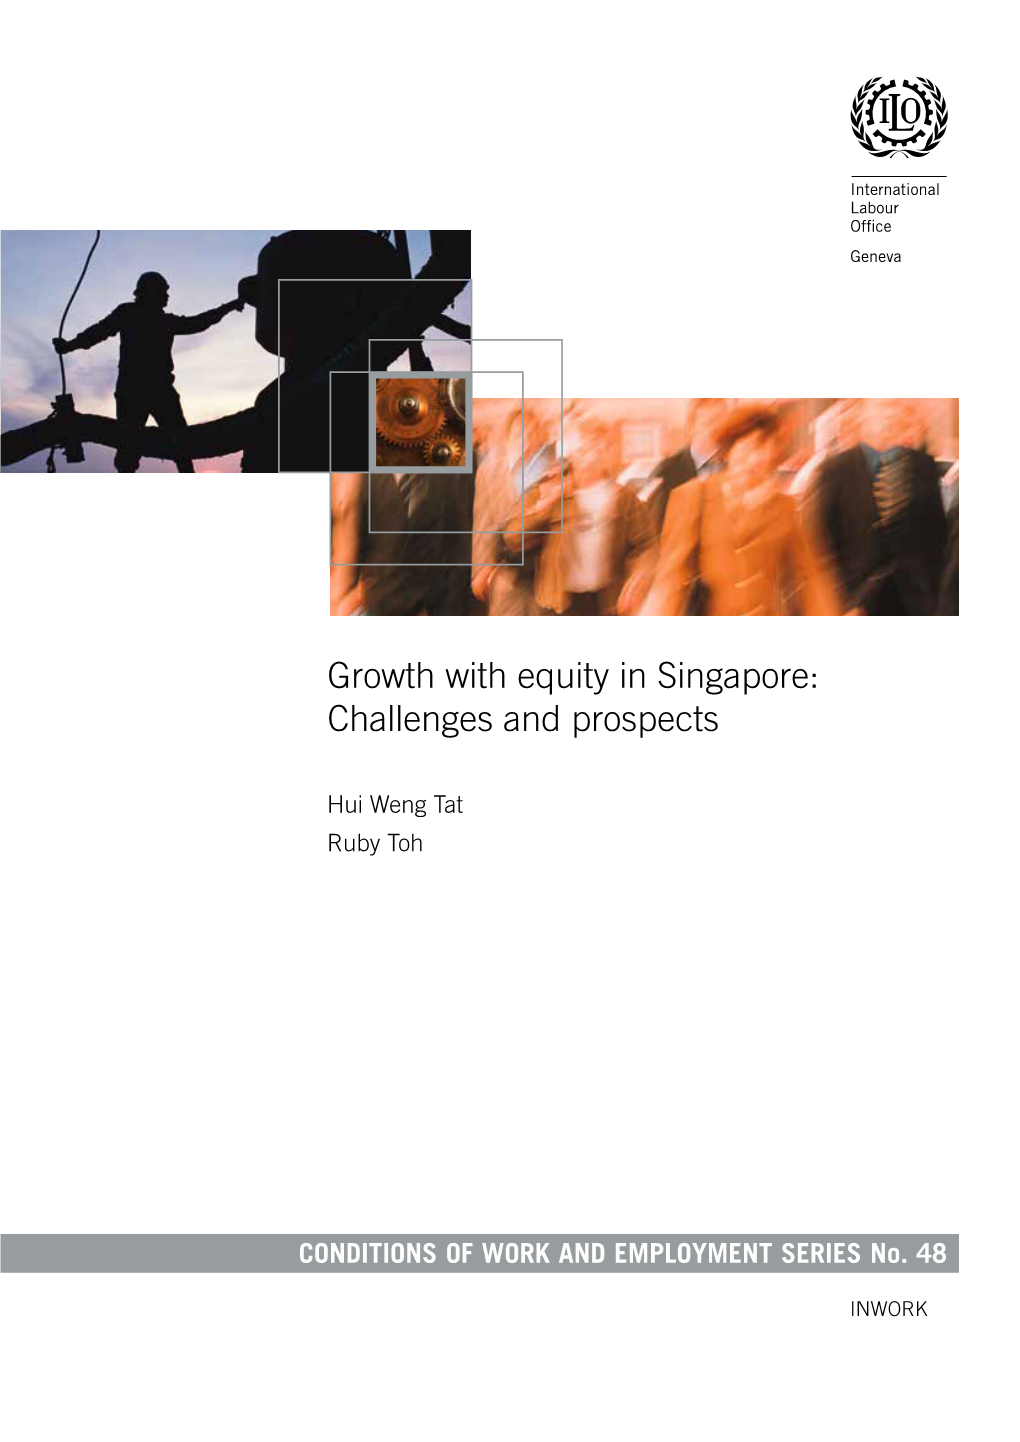 Growth with Equity in Singapore: Challenges and Prospects